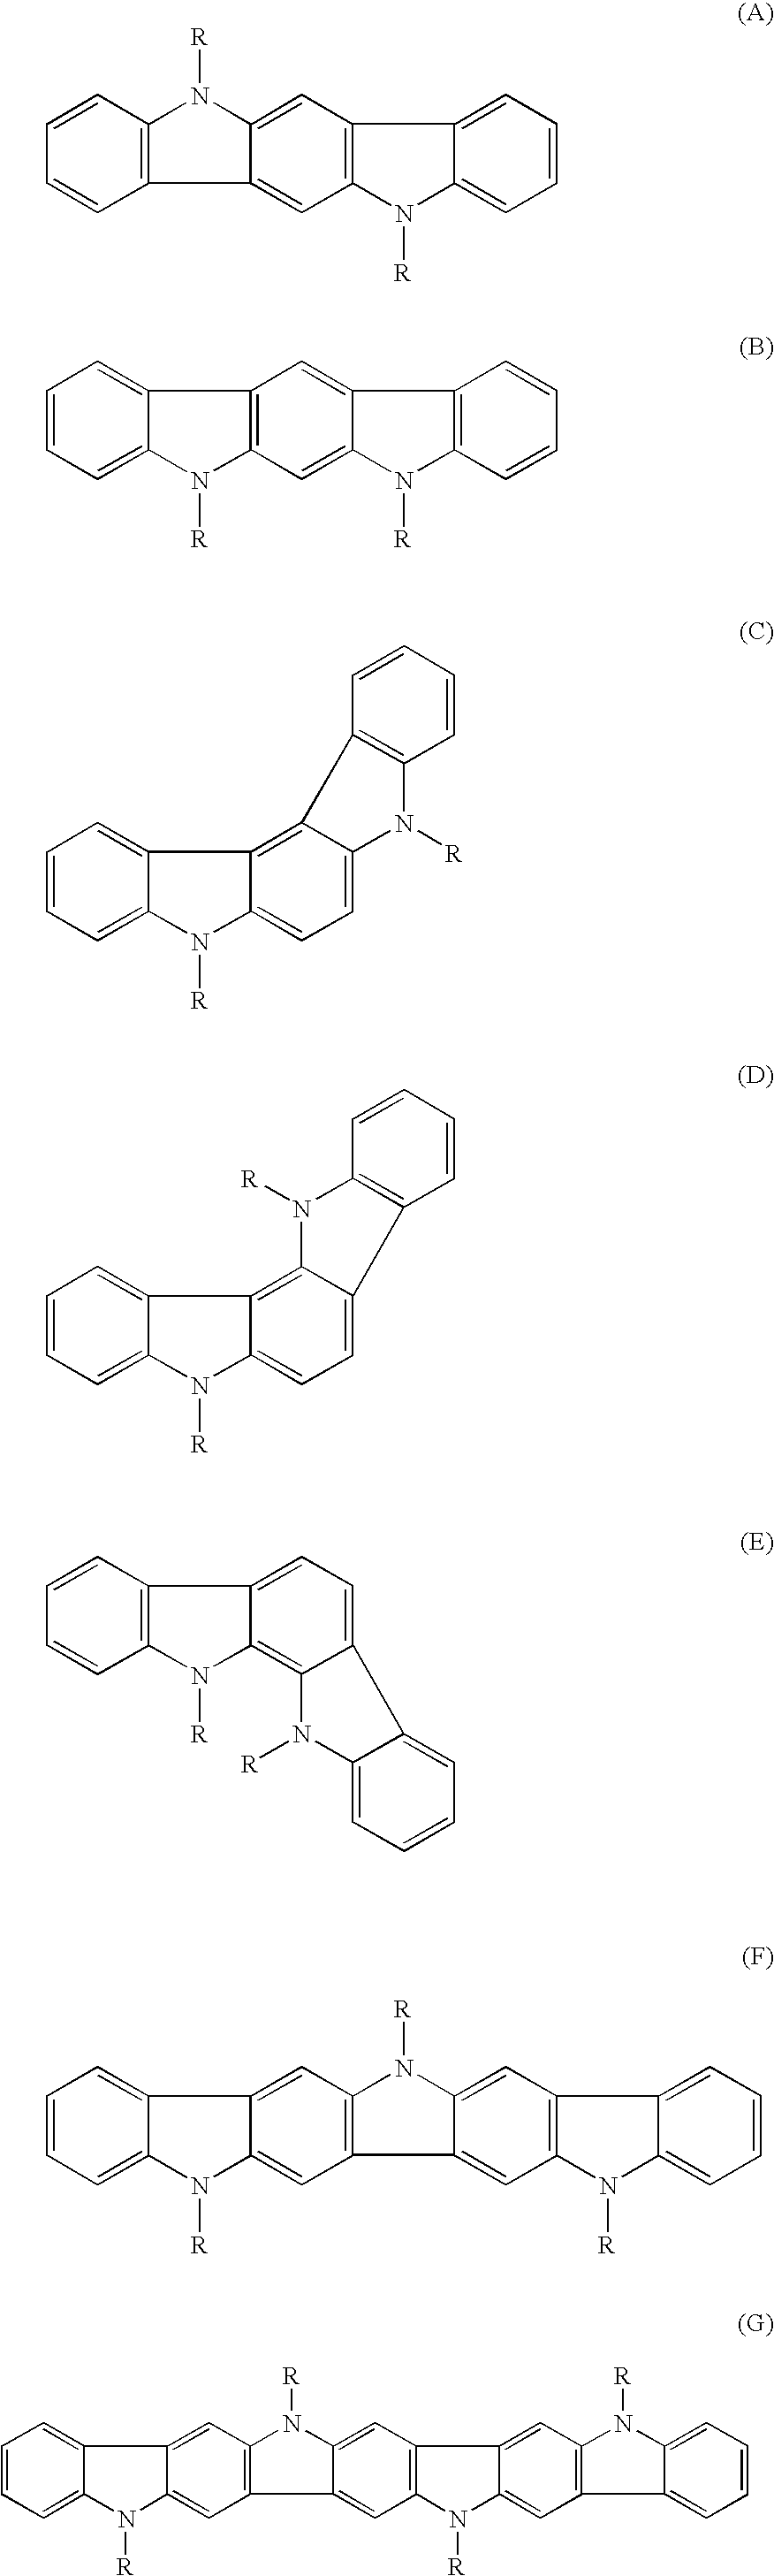 Process to form compound with indolocarbazole moieties